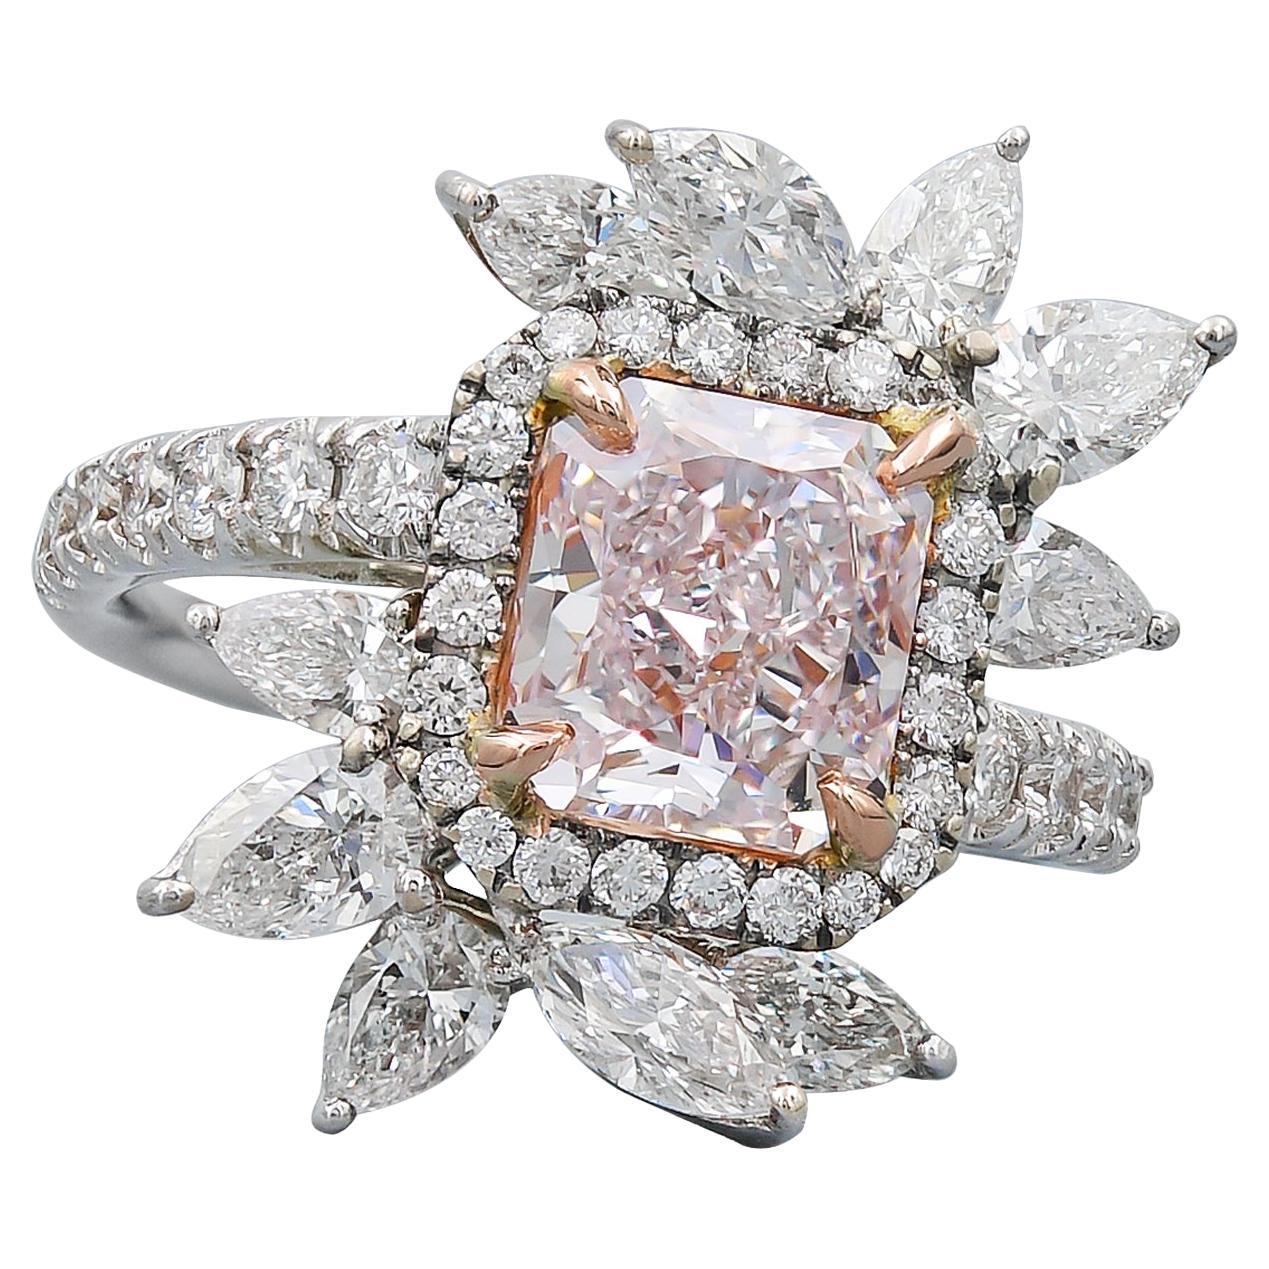 Spectra Fine Jewlery, GIA Certified 2.62 Carat Pink Diamond Cocktail Ring For Sale